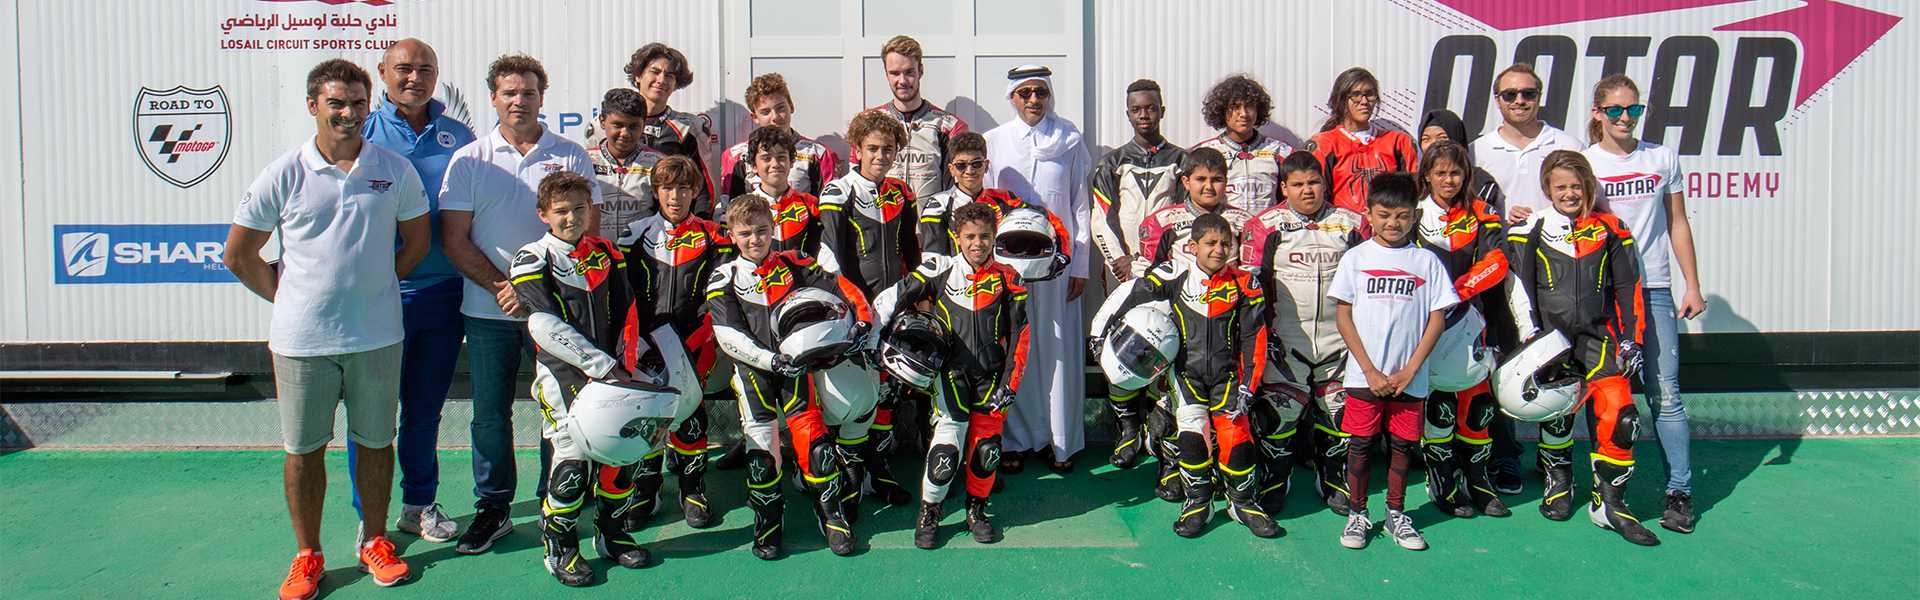 HE Minister of Culture and Sports lauds Qatar Motorsports Academy